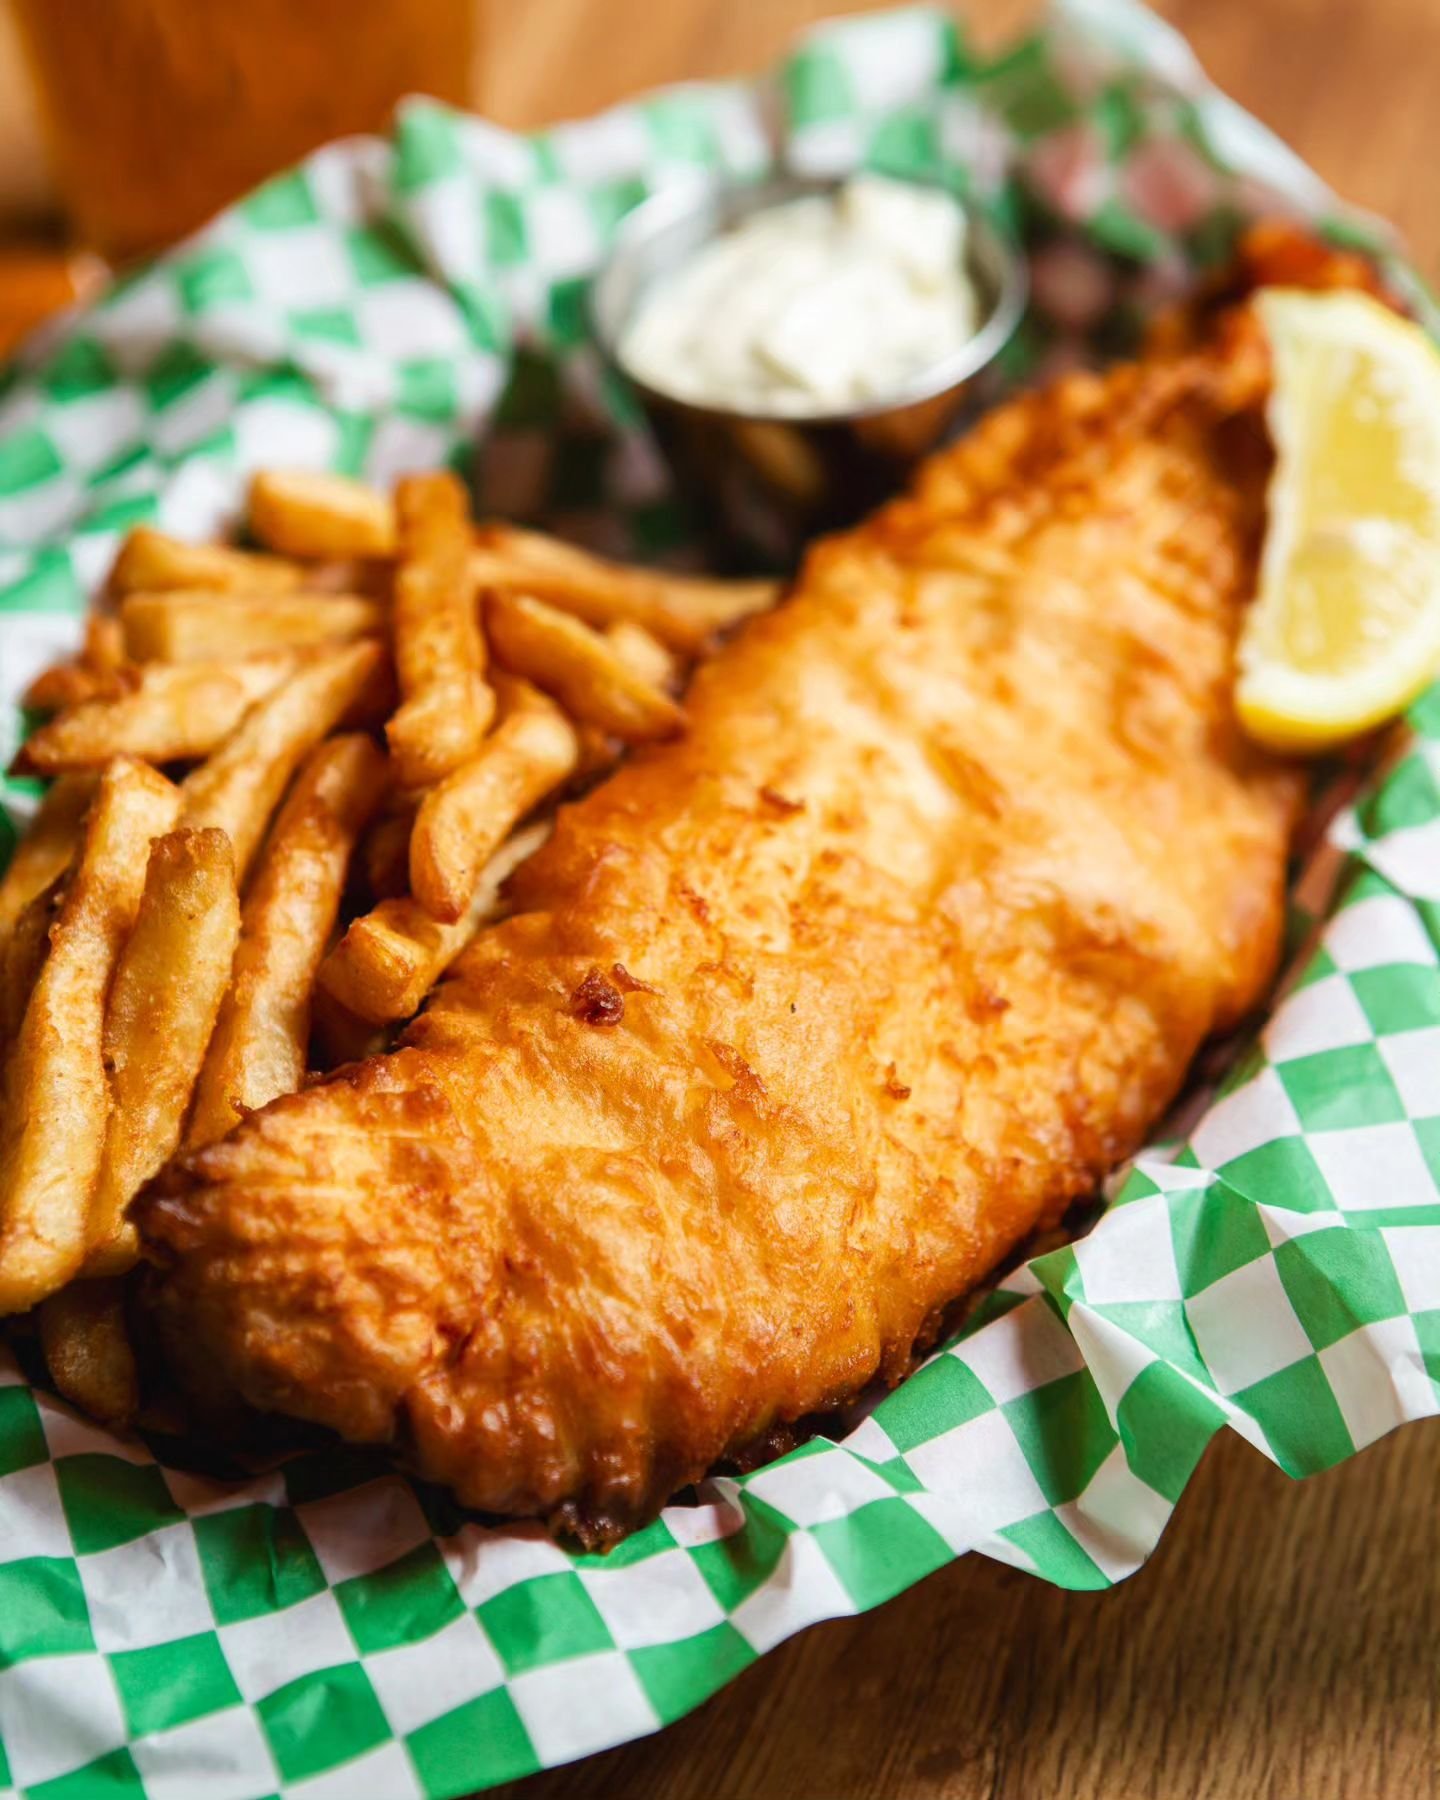 Here's a menu item that'll make your weekend a bit more exciting.  Pair it with a glass of cold one 🍻

Alaskan Halibut dipped in a Modelo Beer batter and deep fried till crispy.  Served with fries, coleslaw.  Our weekend special available through su